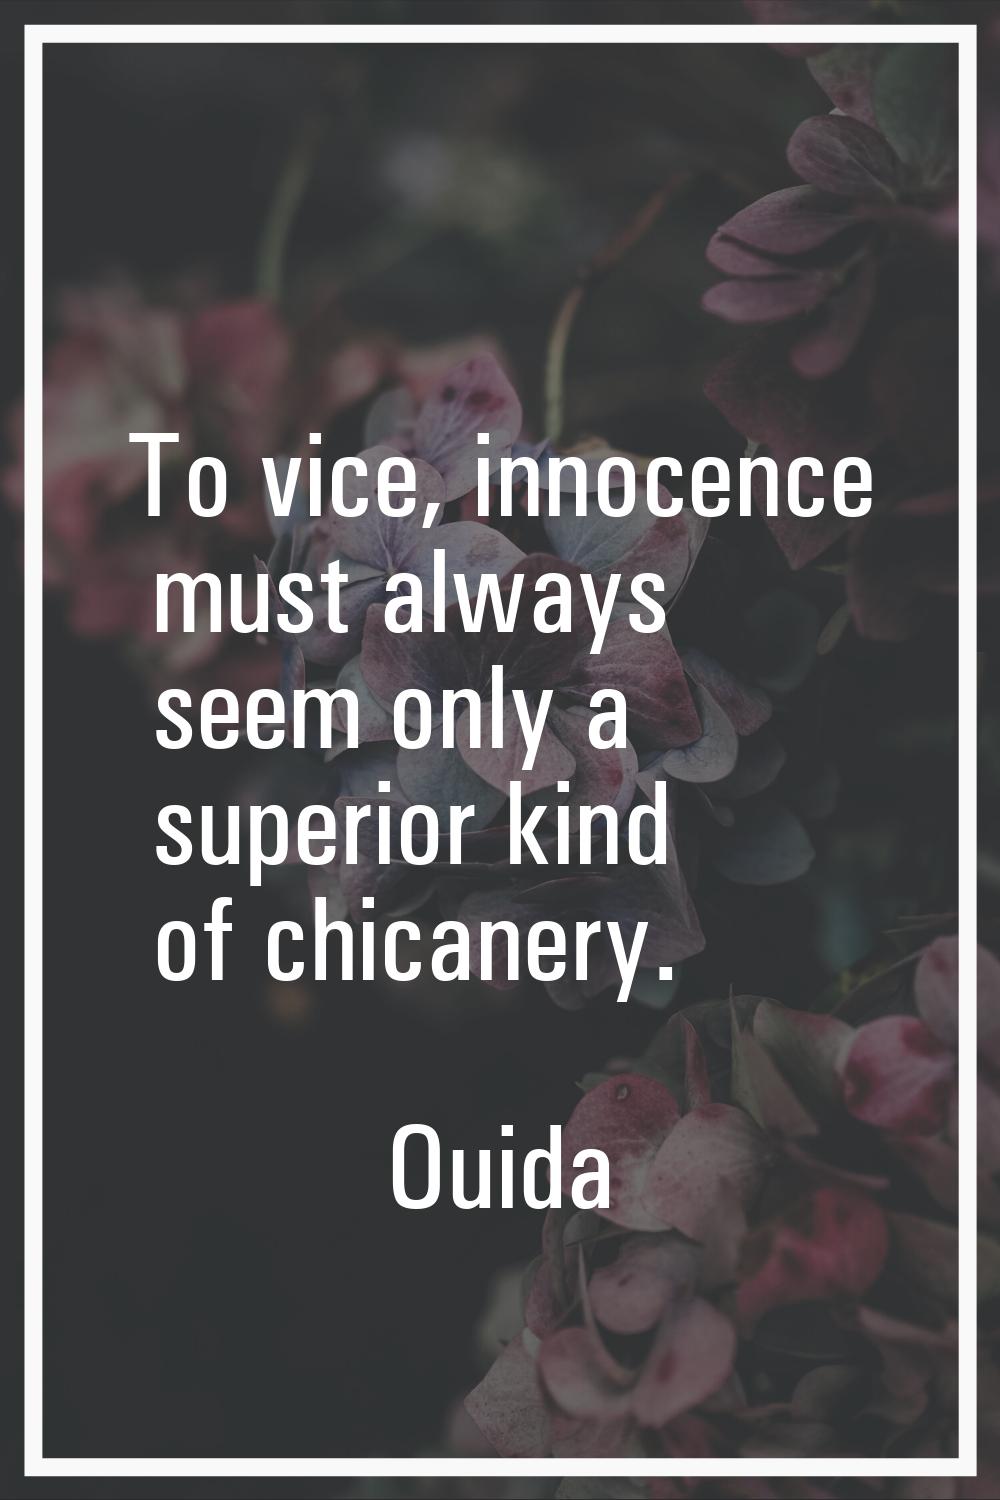 To vice, innocence must always seem only a superior kind of chicanery.